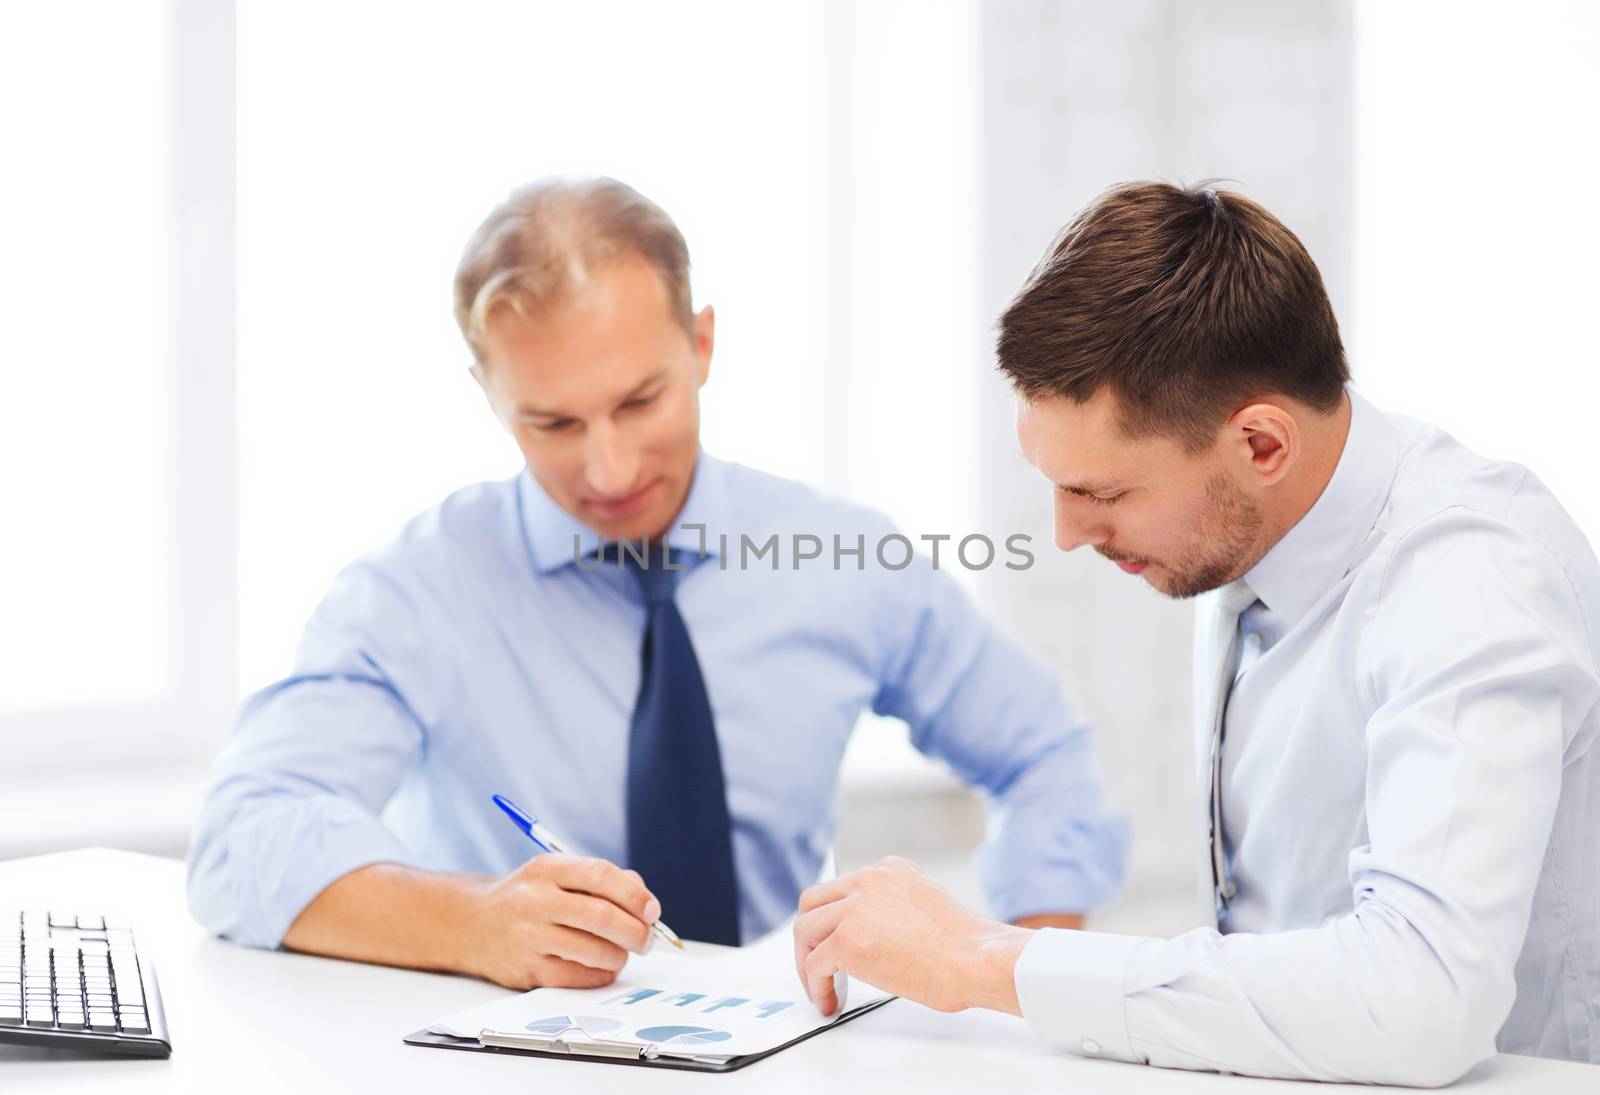 businesss concept - two businessmen discussing graphs on meeting